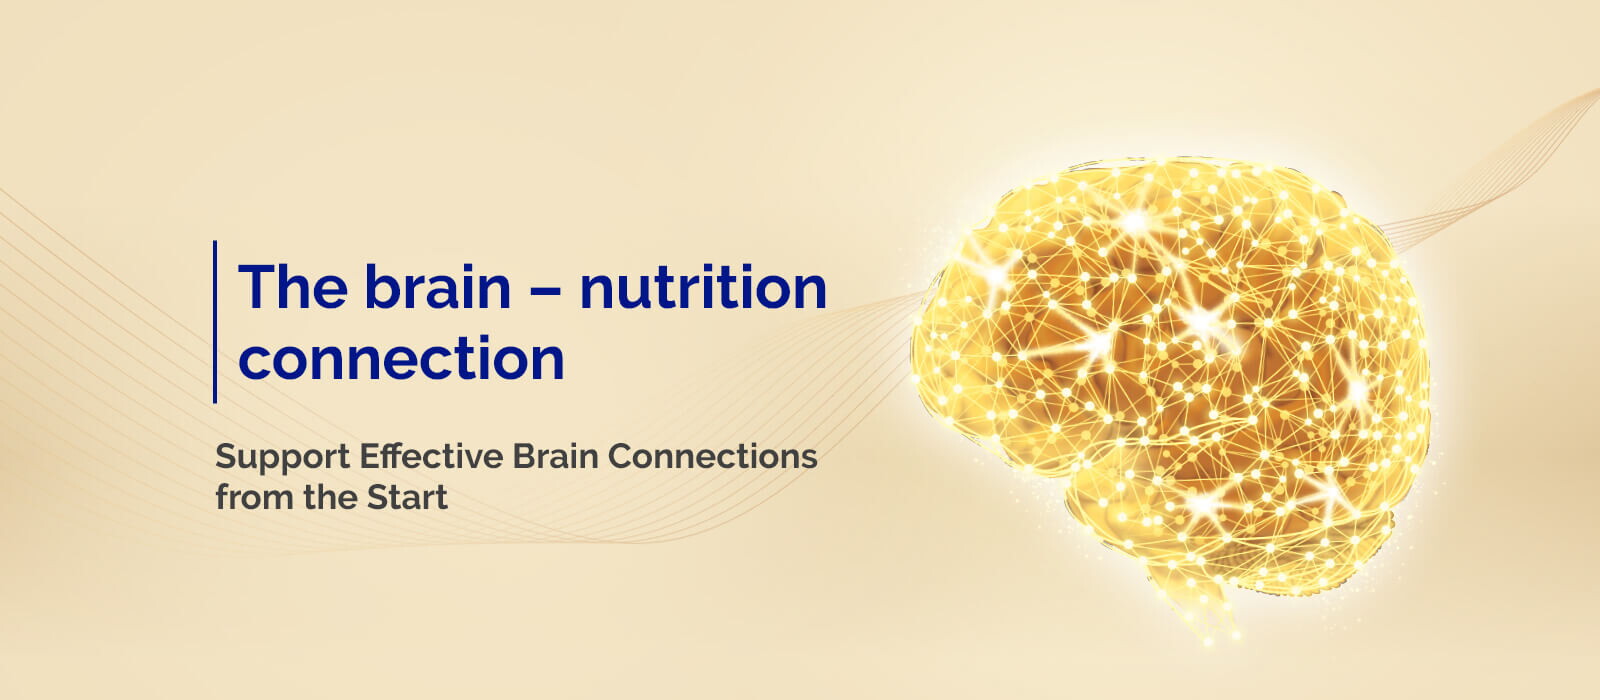 The brain nutrition connection